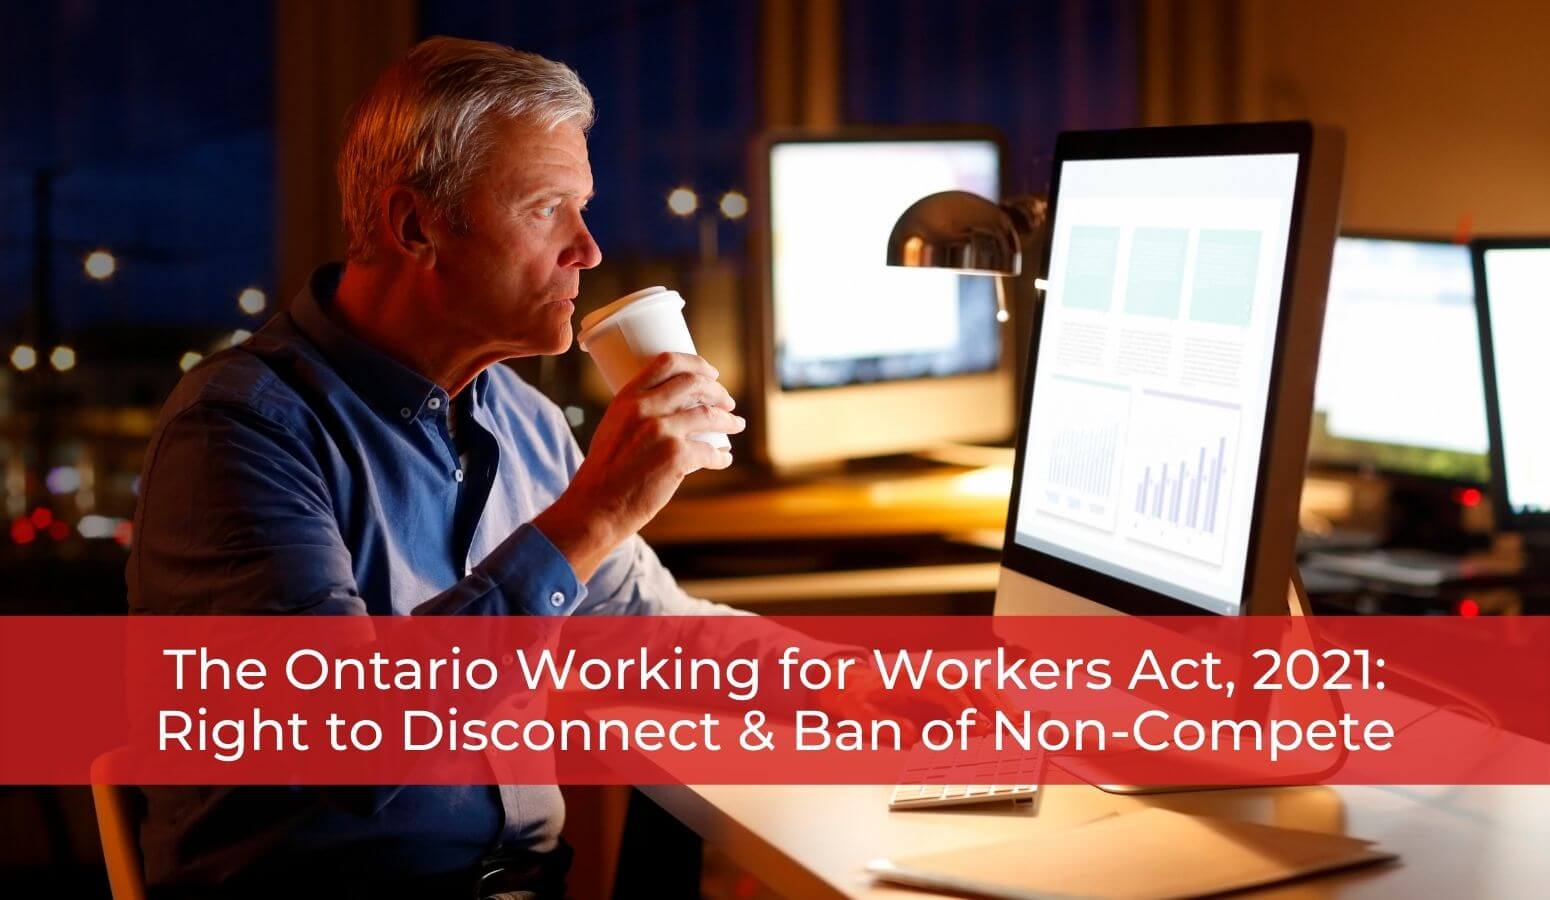 The Ontario Working for Workers Act, 2021 Right to Disconnect - Oct 27 - Whitten & Lublin Employment Lawyers - Toronto Employment Lawyers - Ontario Laws